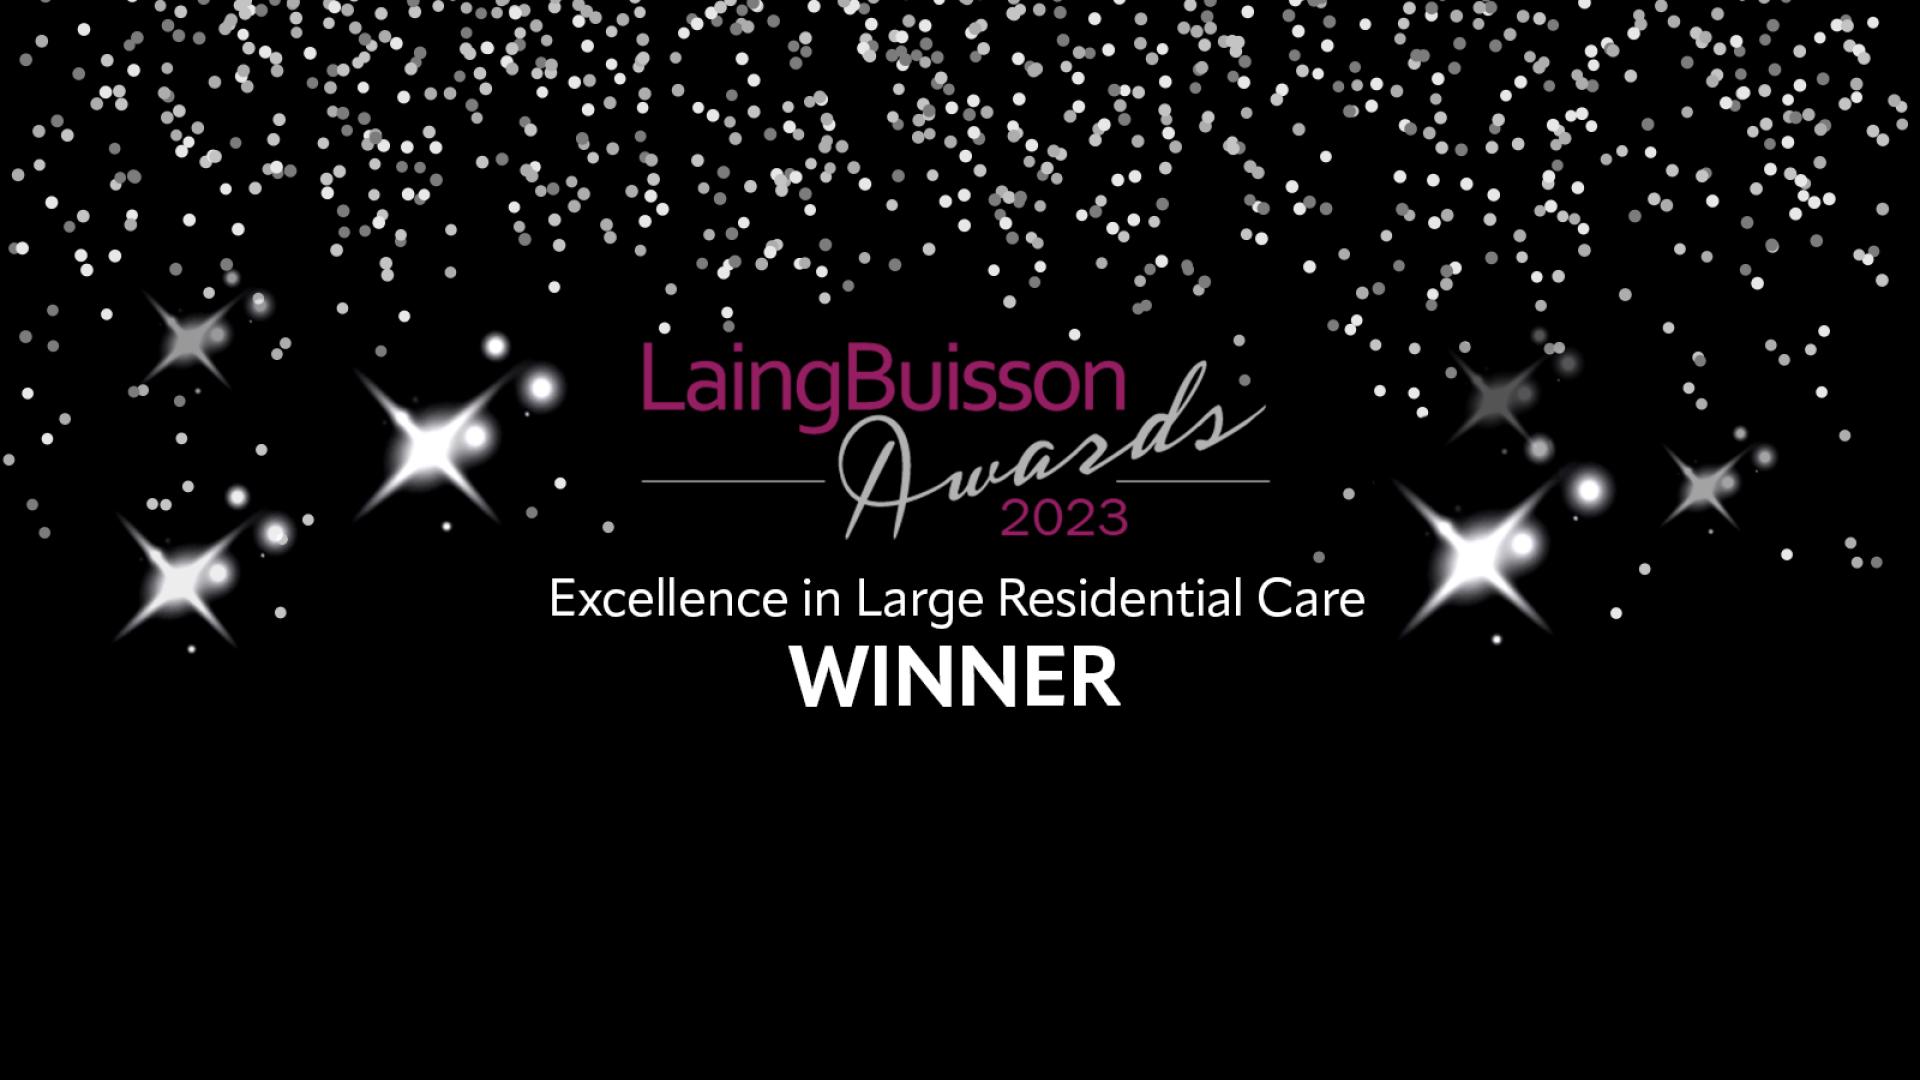 Orchard Care Homes are proud winners of the LaingBuisson Excellence in Large Residential Care Award 2023